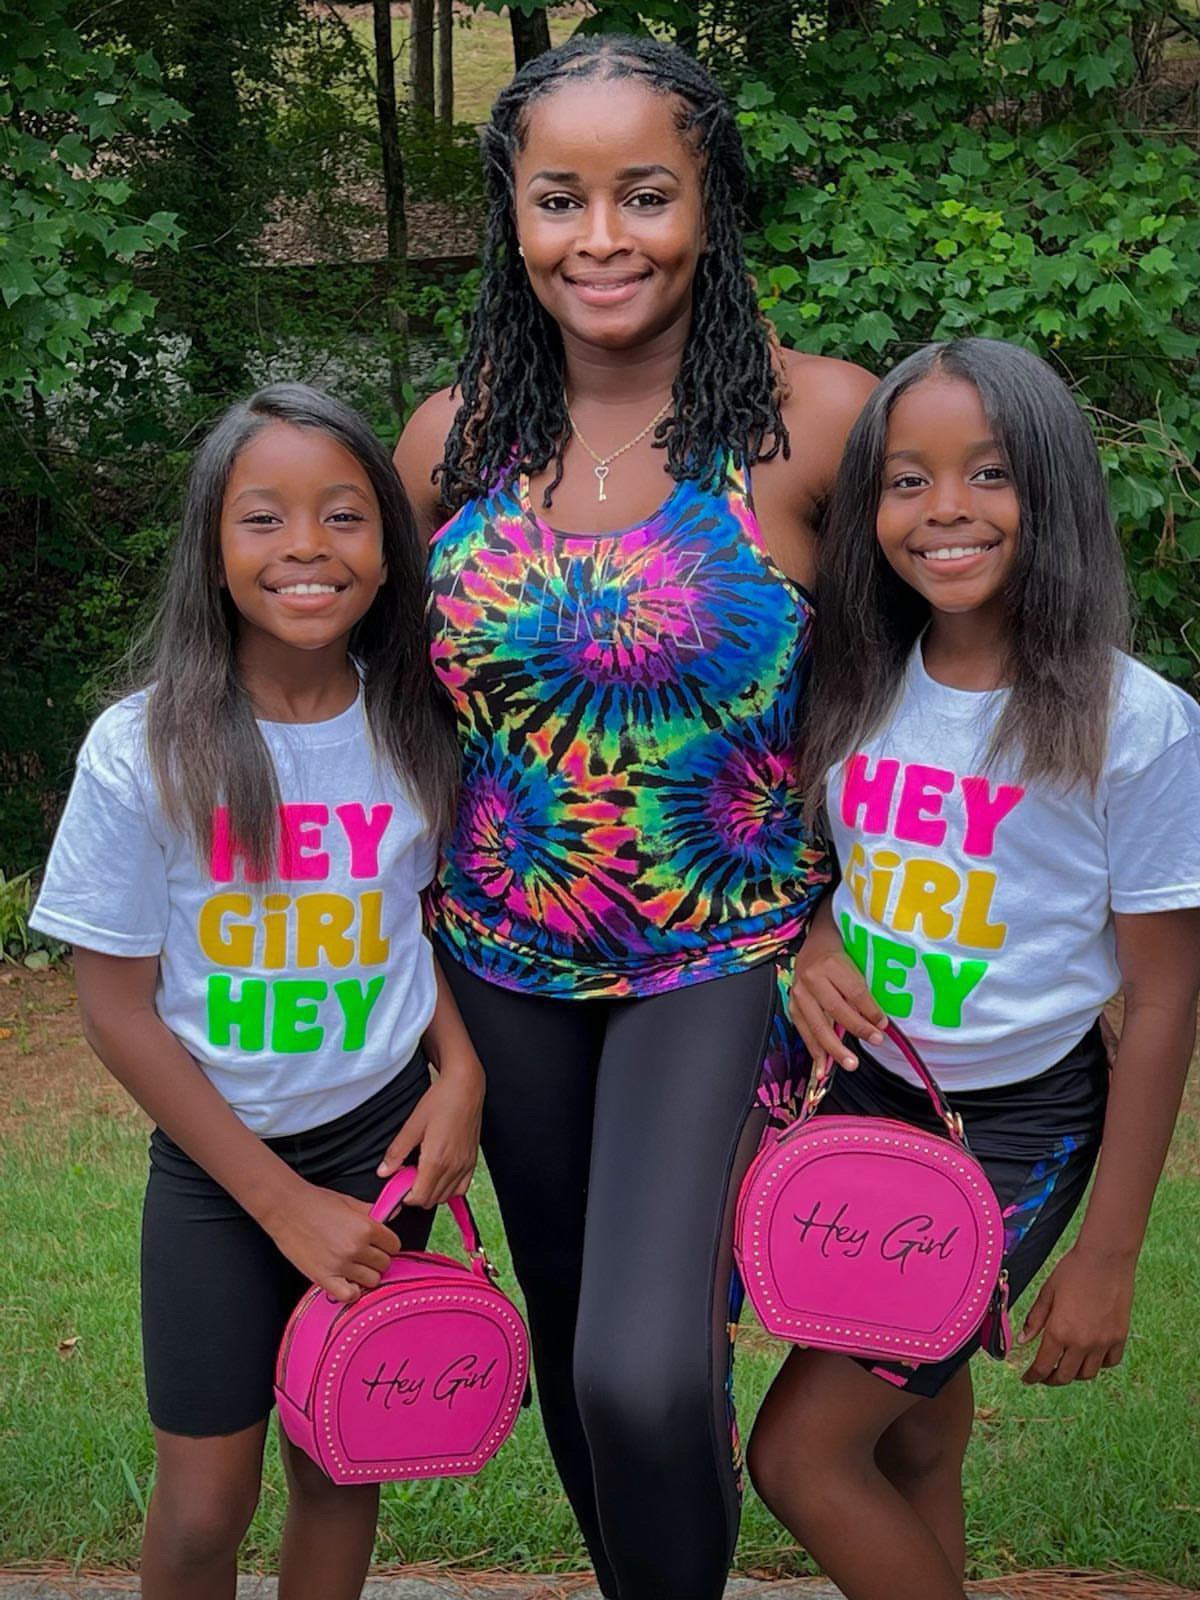 Jayla Bean- “HEY GIRL” Mommy and Me Shirts